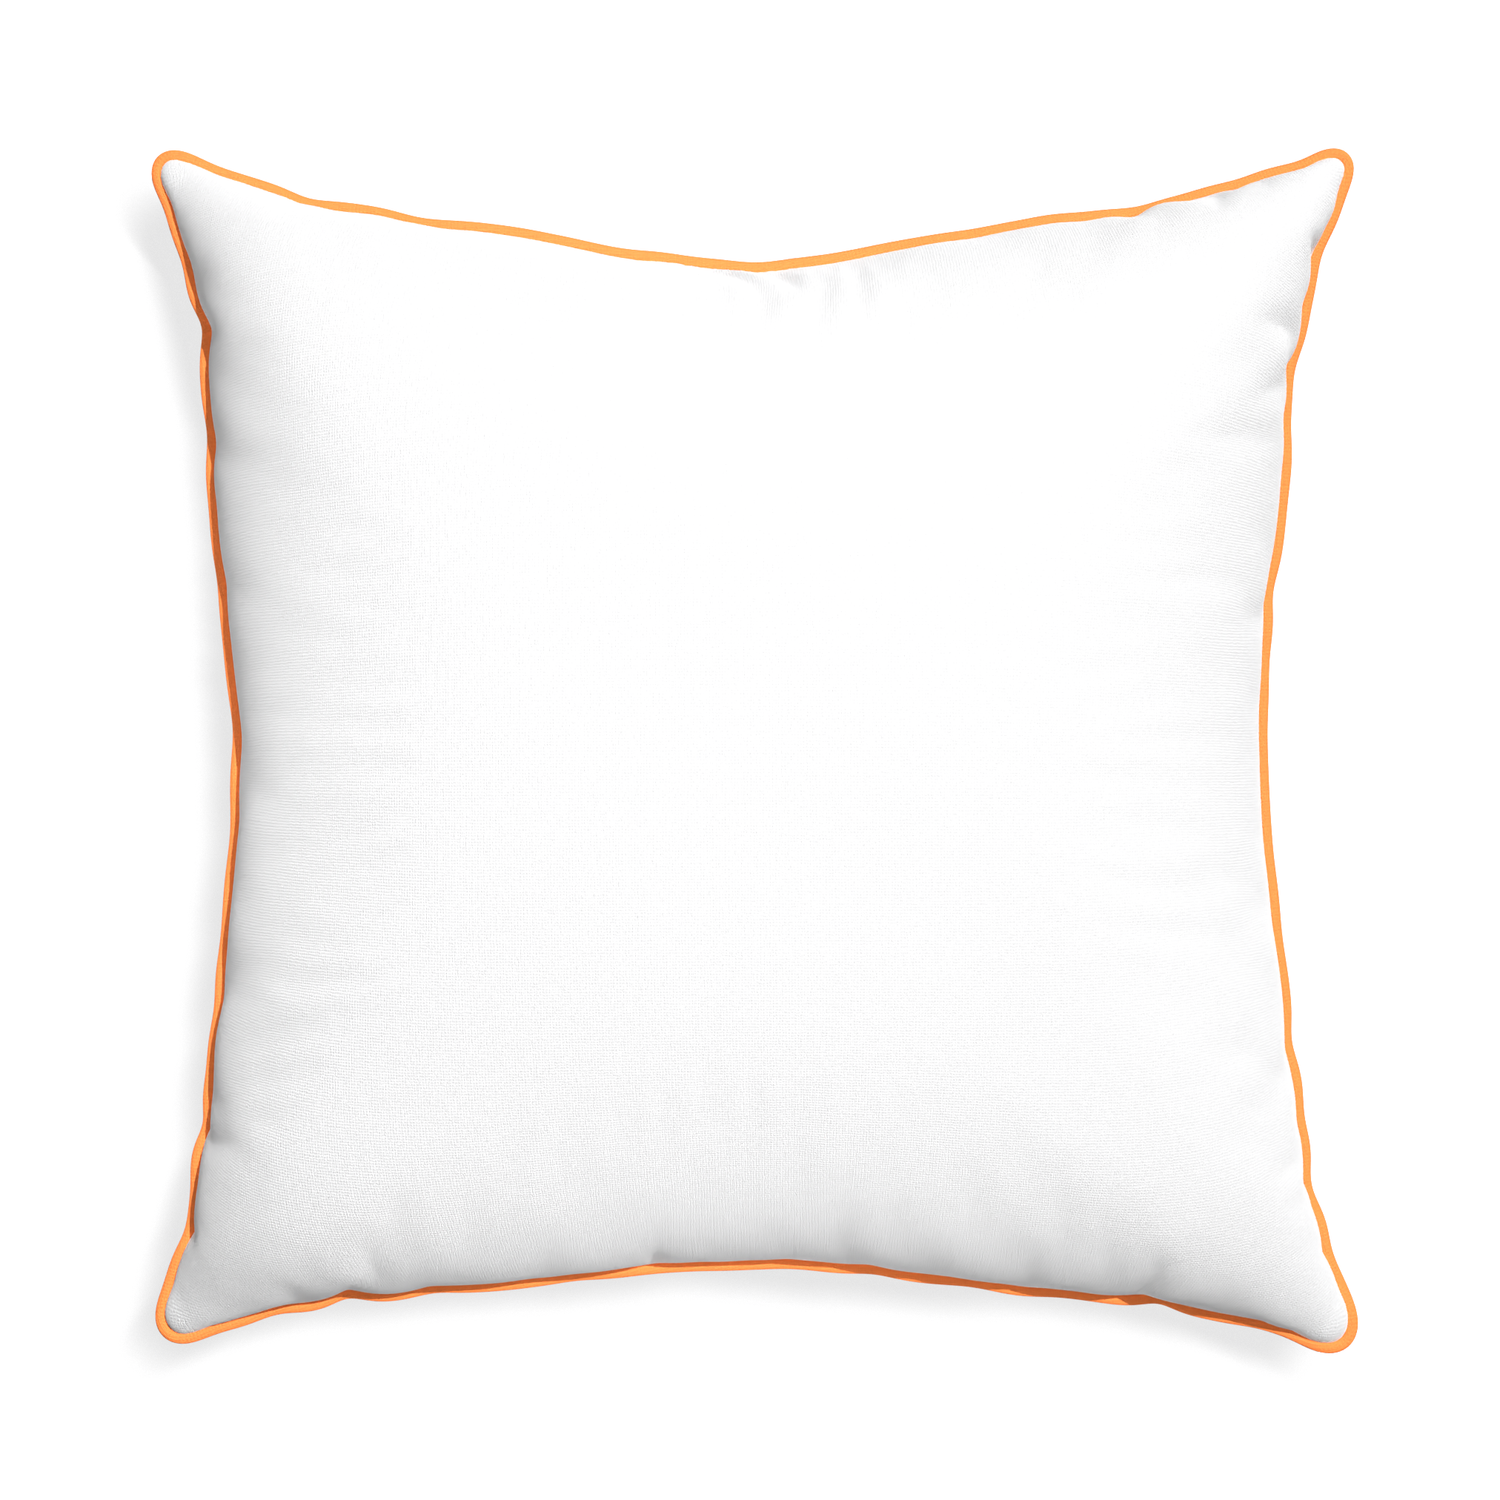 Euro-sham snow custom pillow with clementine piping on white background